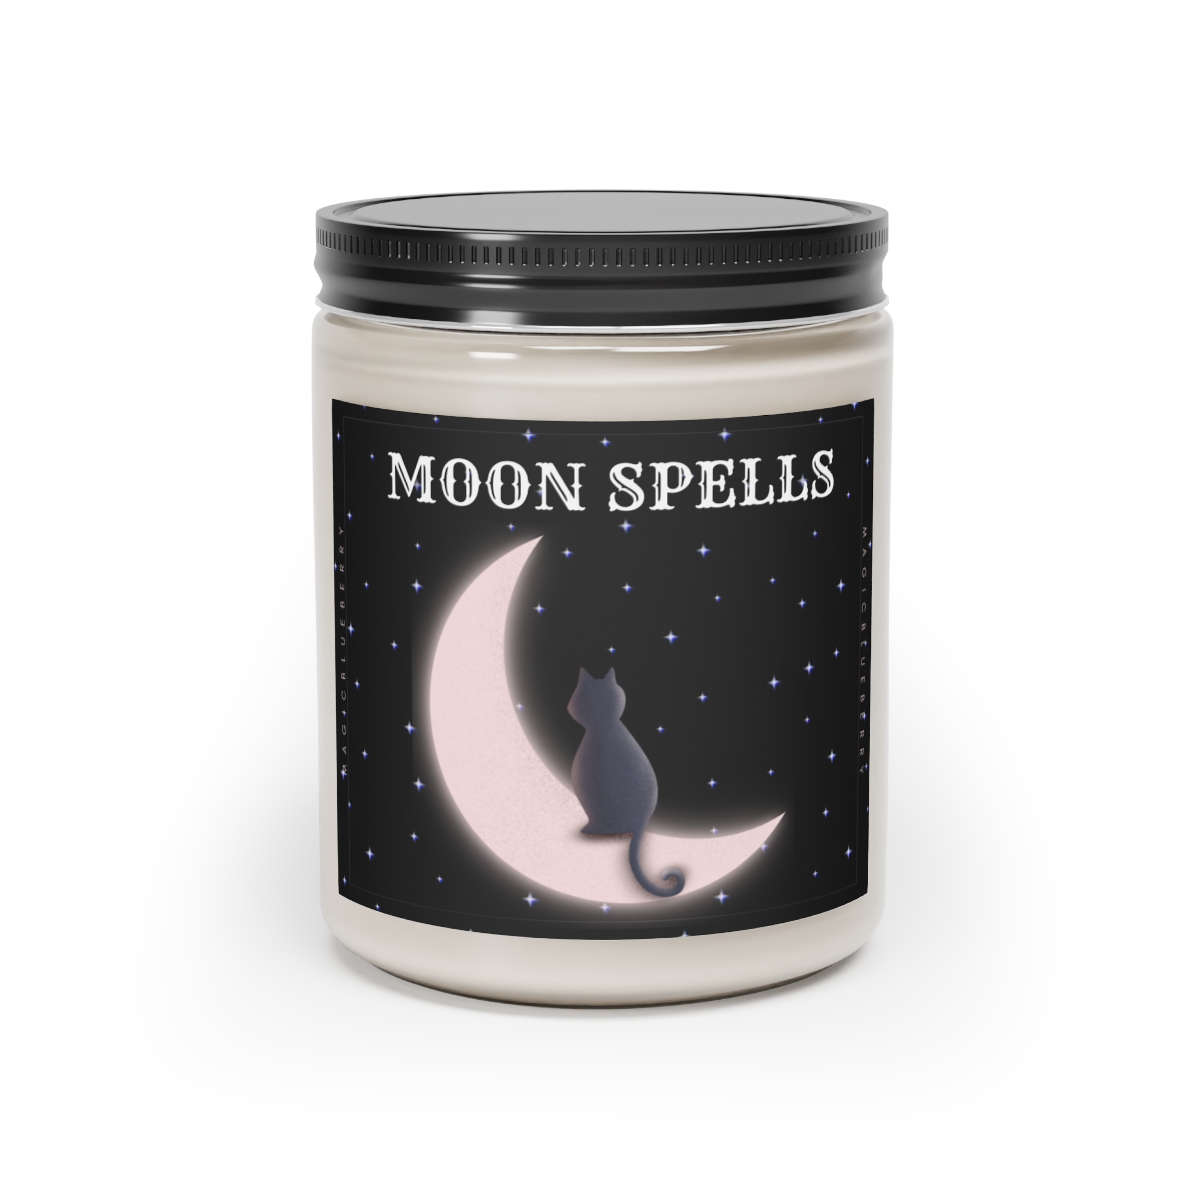 Moon Spells - Scented Vegan Soy Wax Candles, Clear Jar Candle, Spell Candles, Moon Candle, Vegan Candle, Cotton Wick Candle product thumbnail image